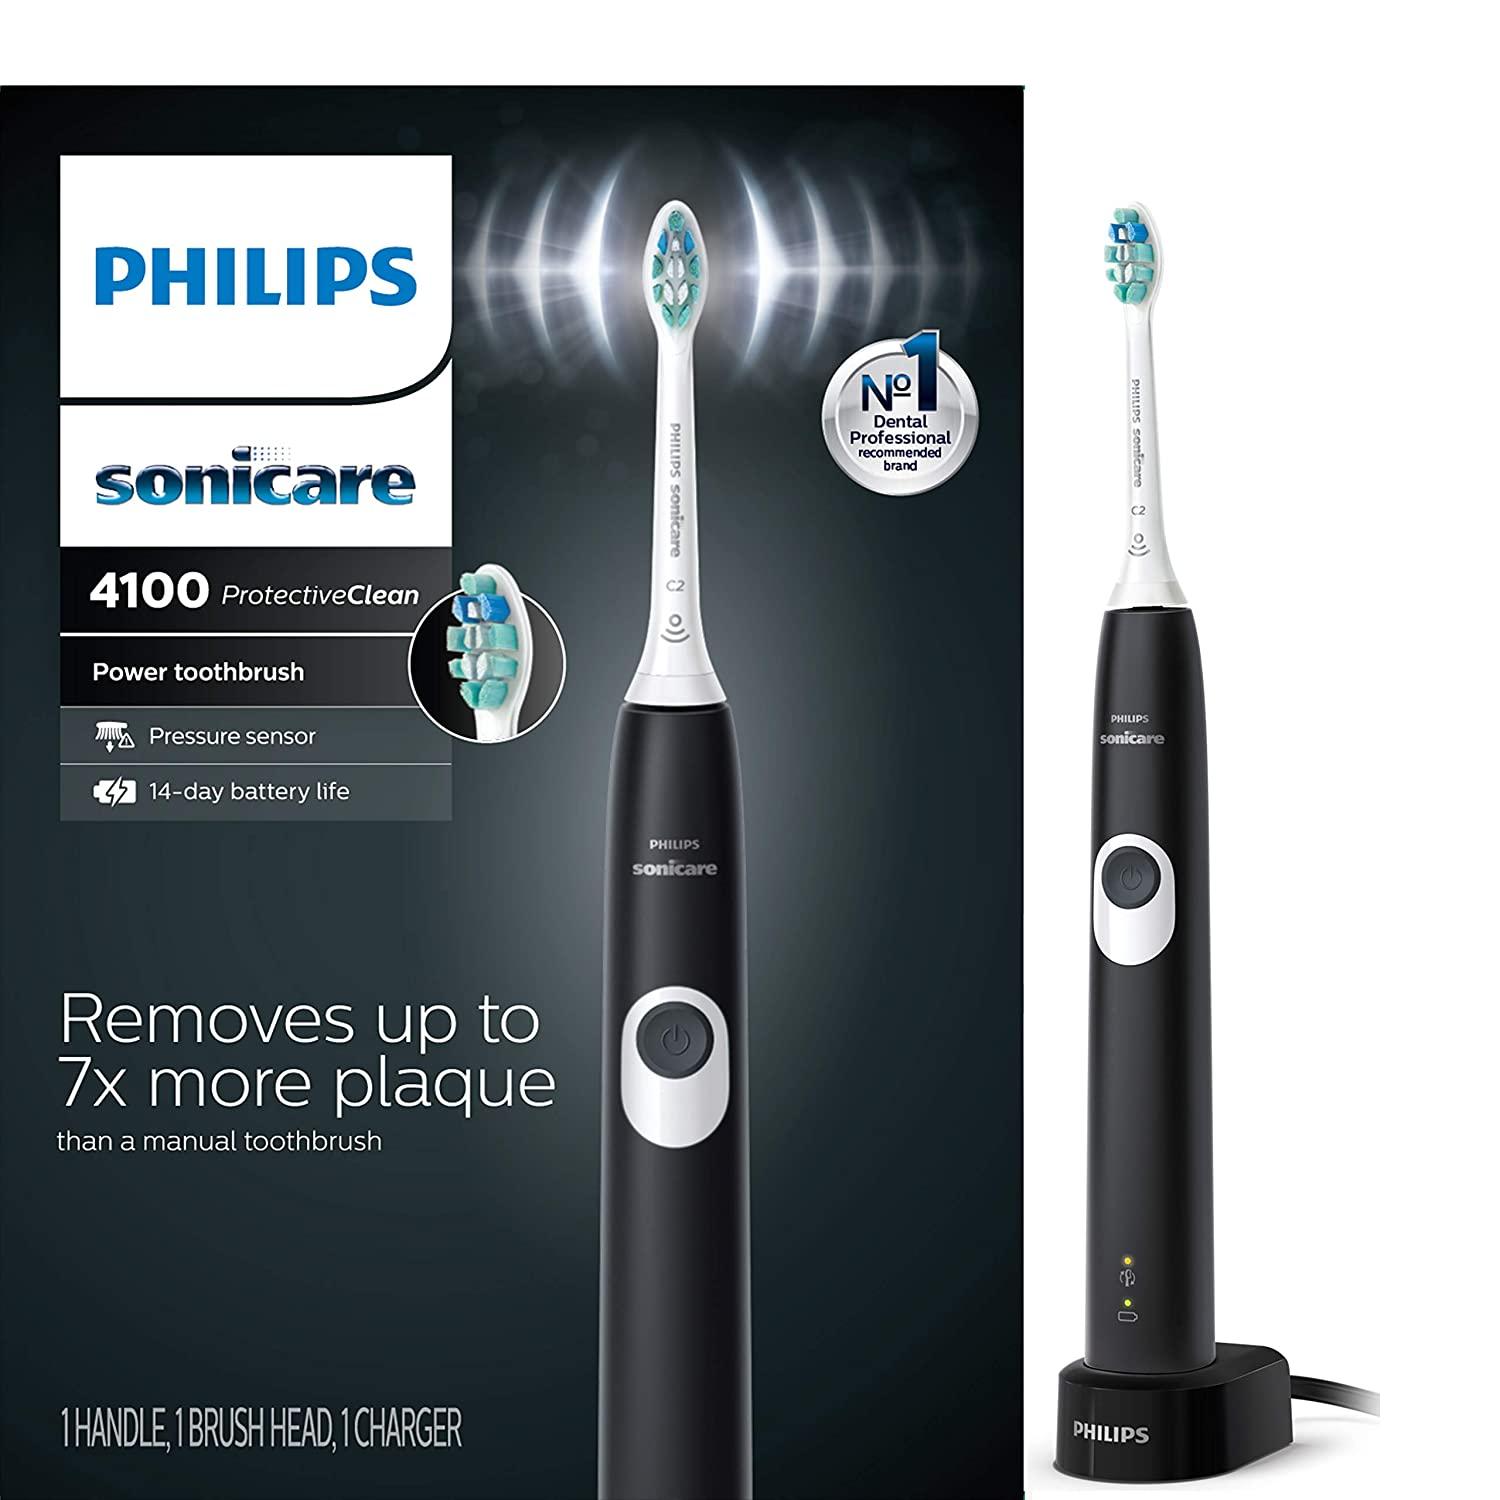 Philips Sonicare HX6810 4100 Rechargeable Electric Toothbrush for $29.99